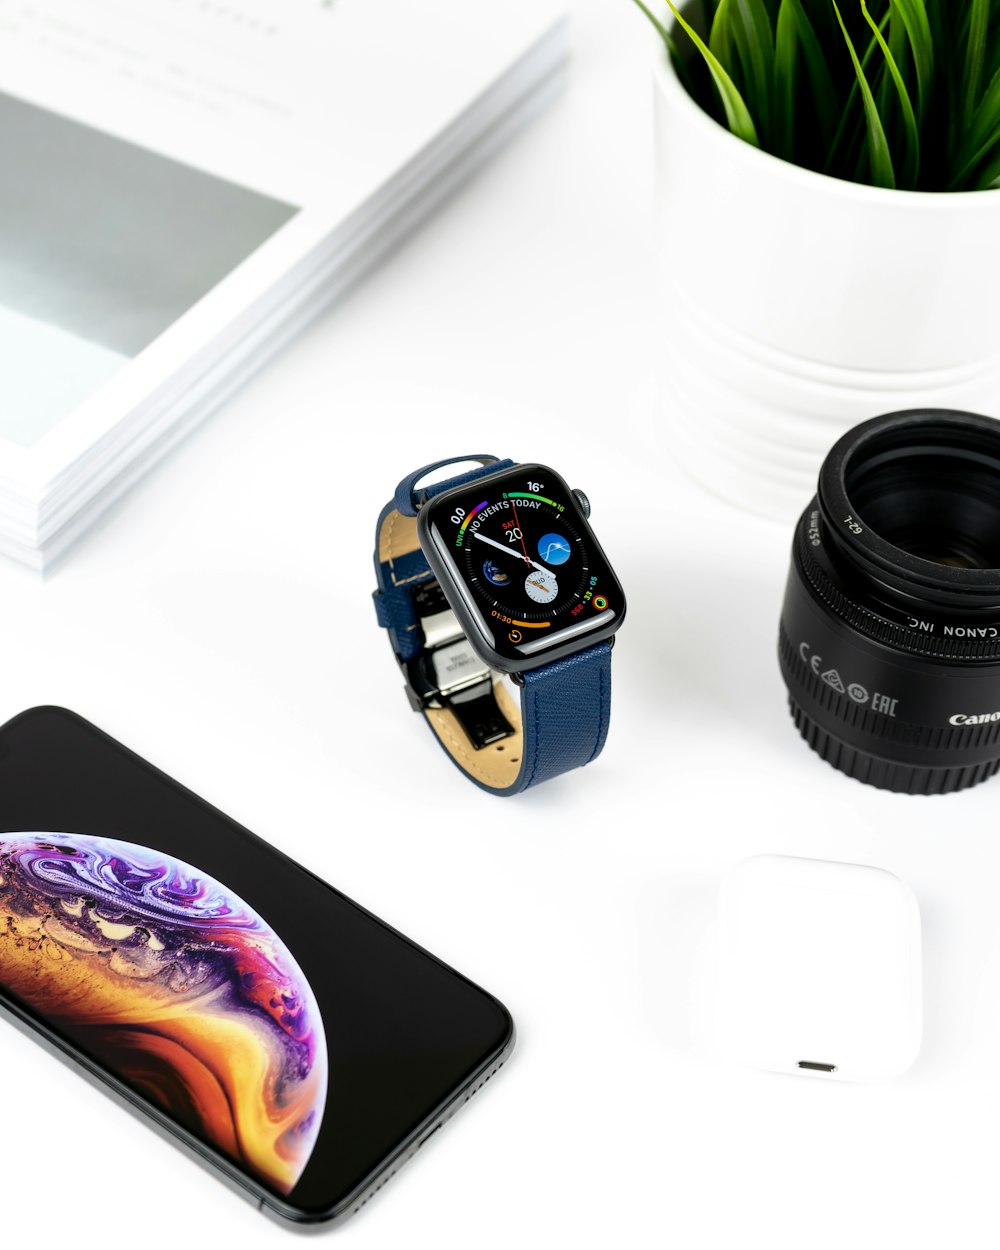 space grey aluminum case Apple Watch with blue leather band on table in between iPhone X and Canon zoom lens